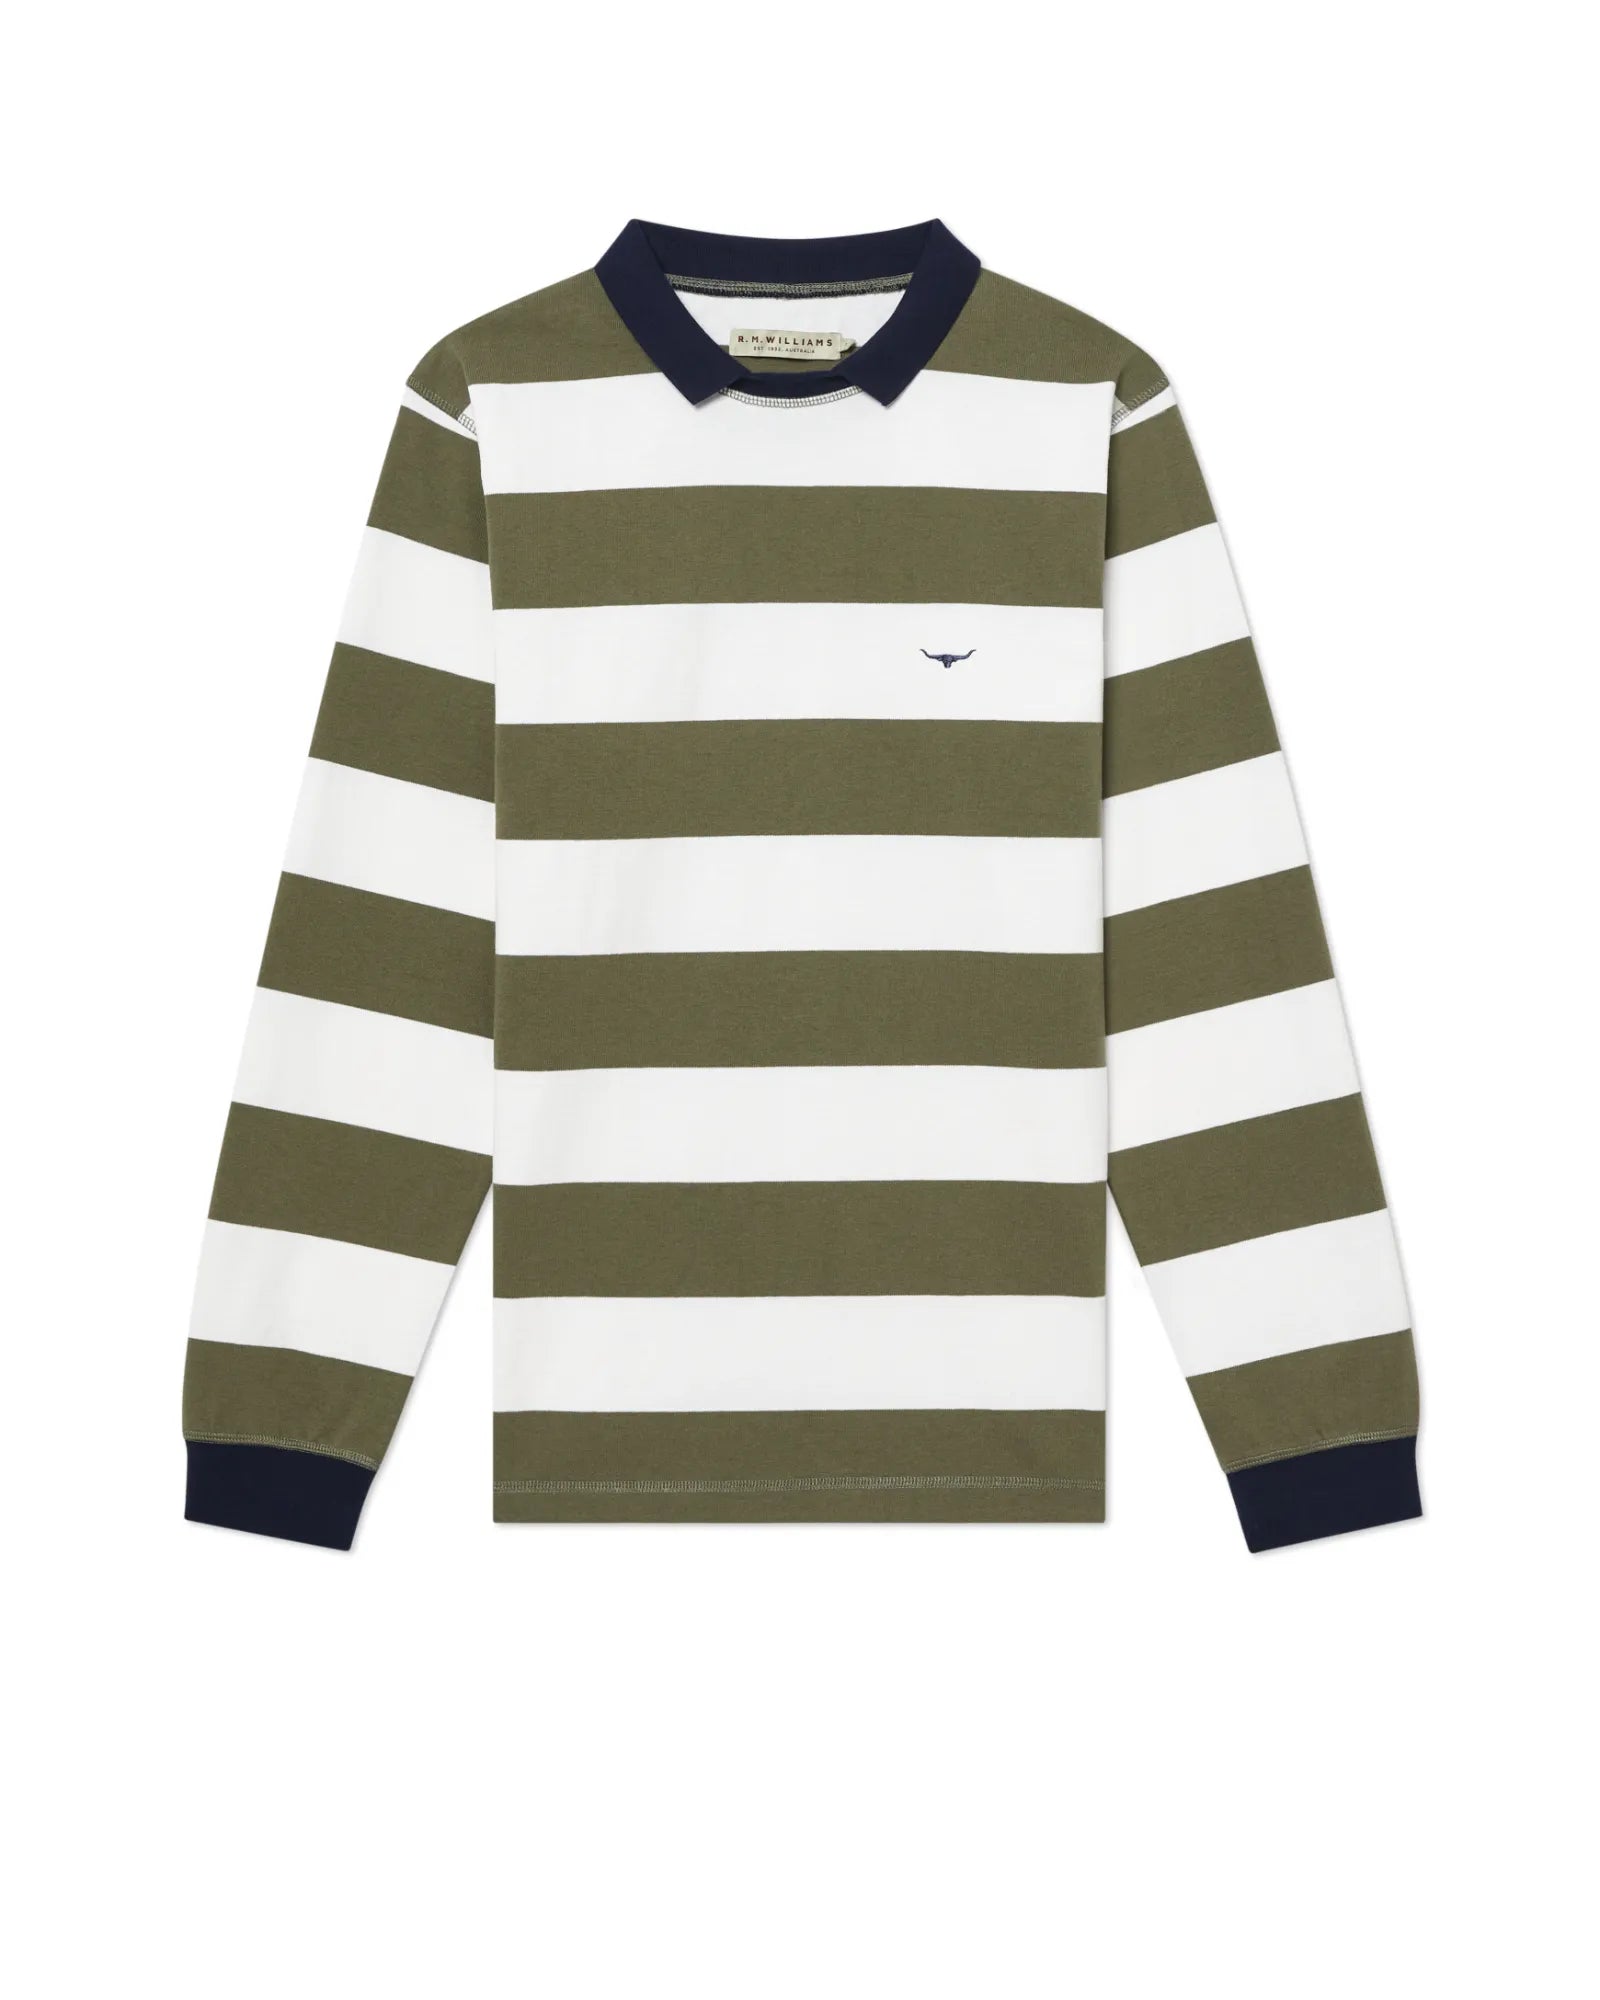 Camden Rugby Shirt - Olive/White